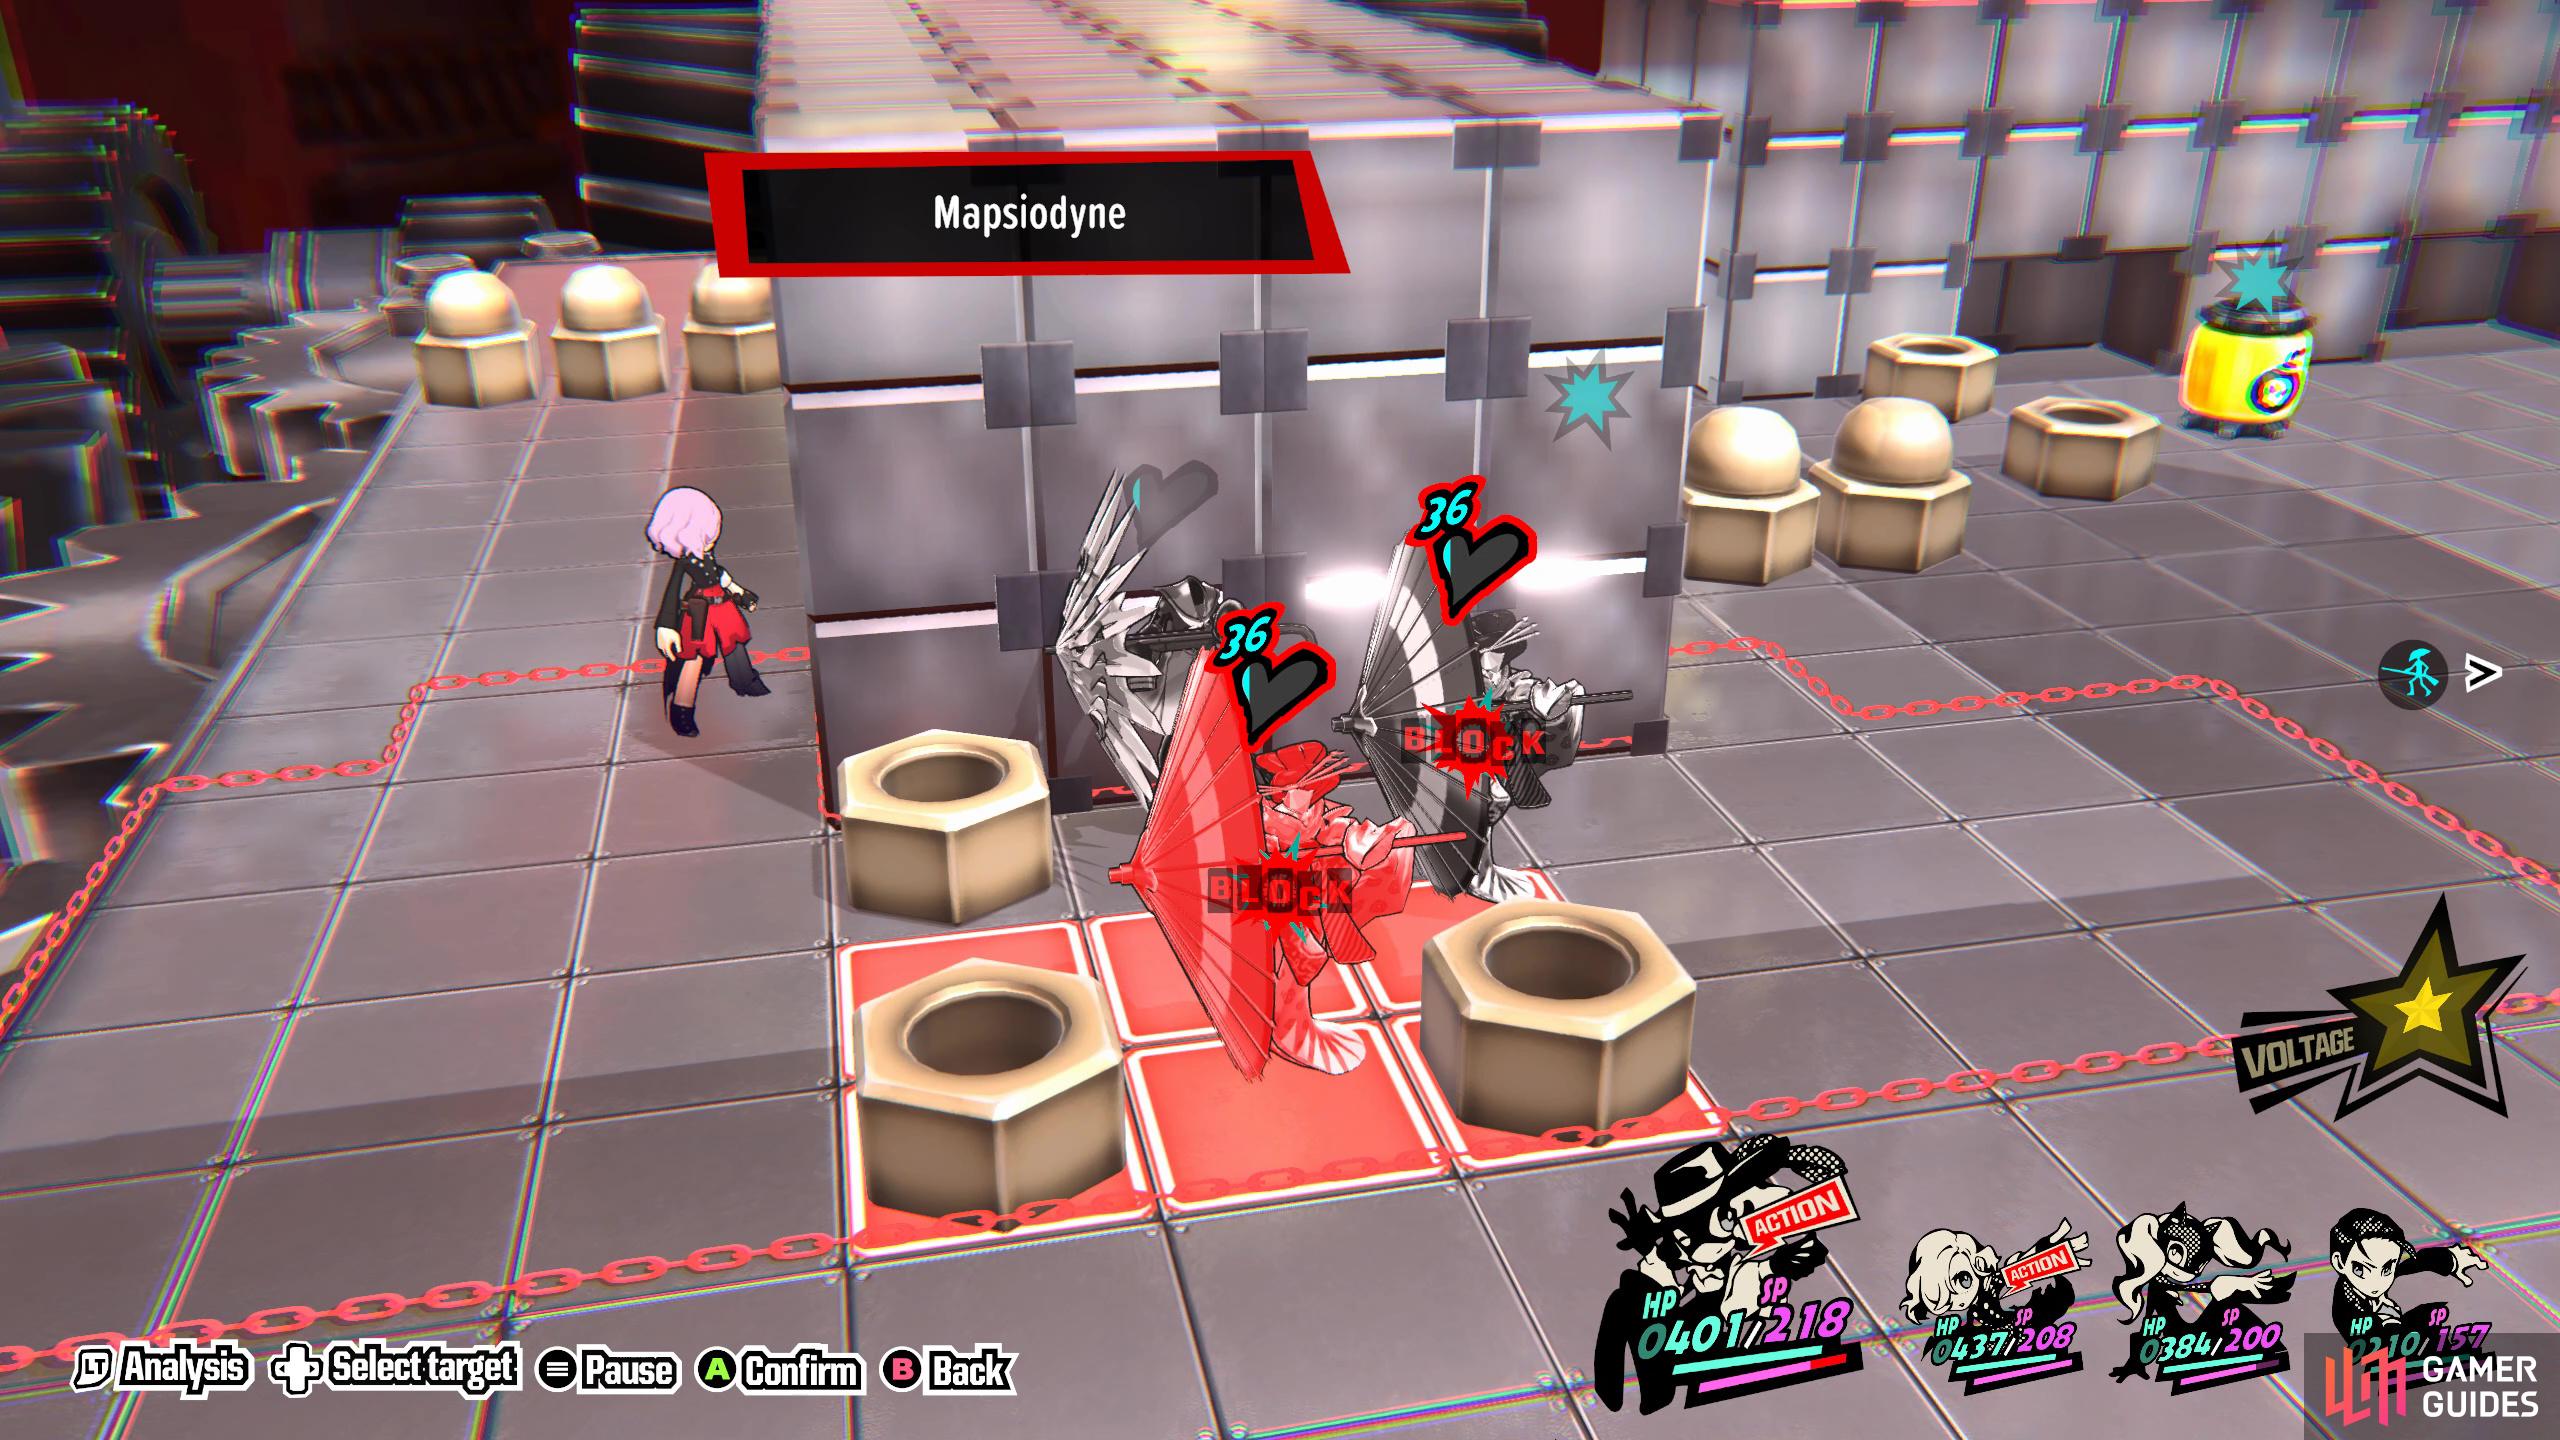 Step 5: Select Haru, stand next to the wall near Erina, and cast Mapsiodyne to get the enemies attention.